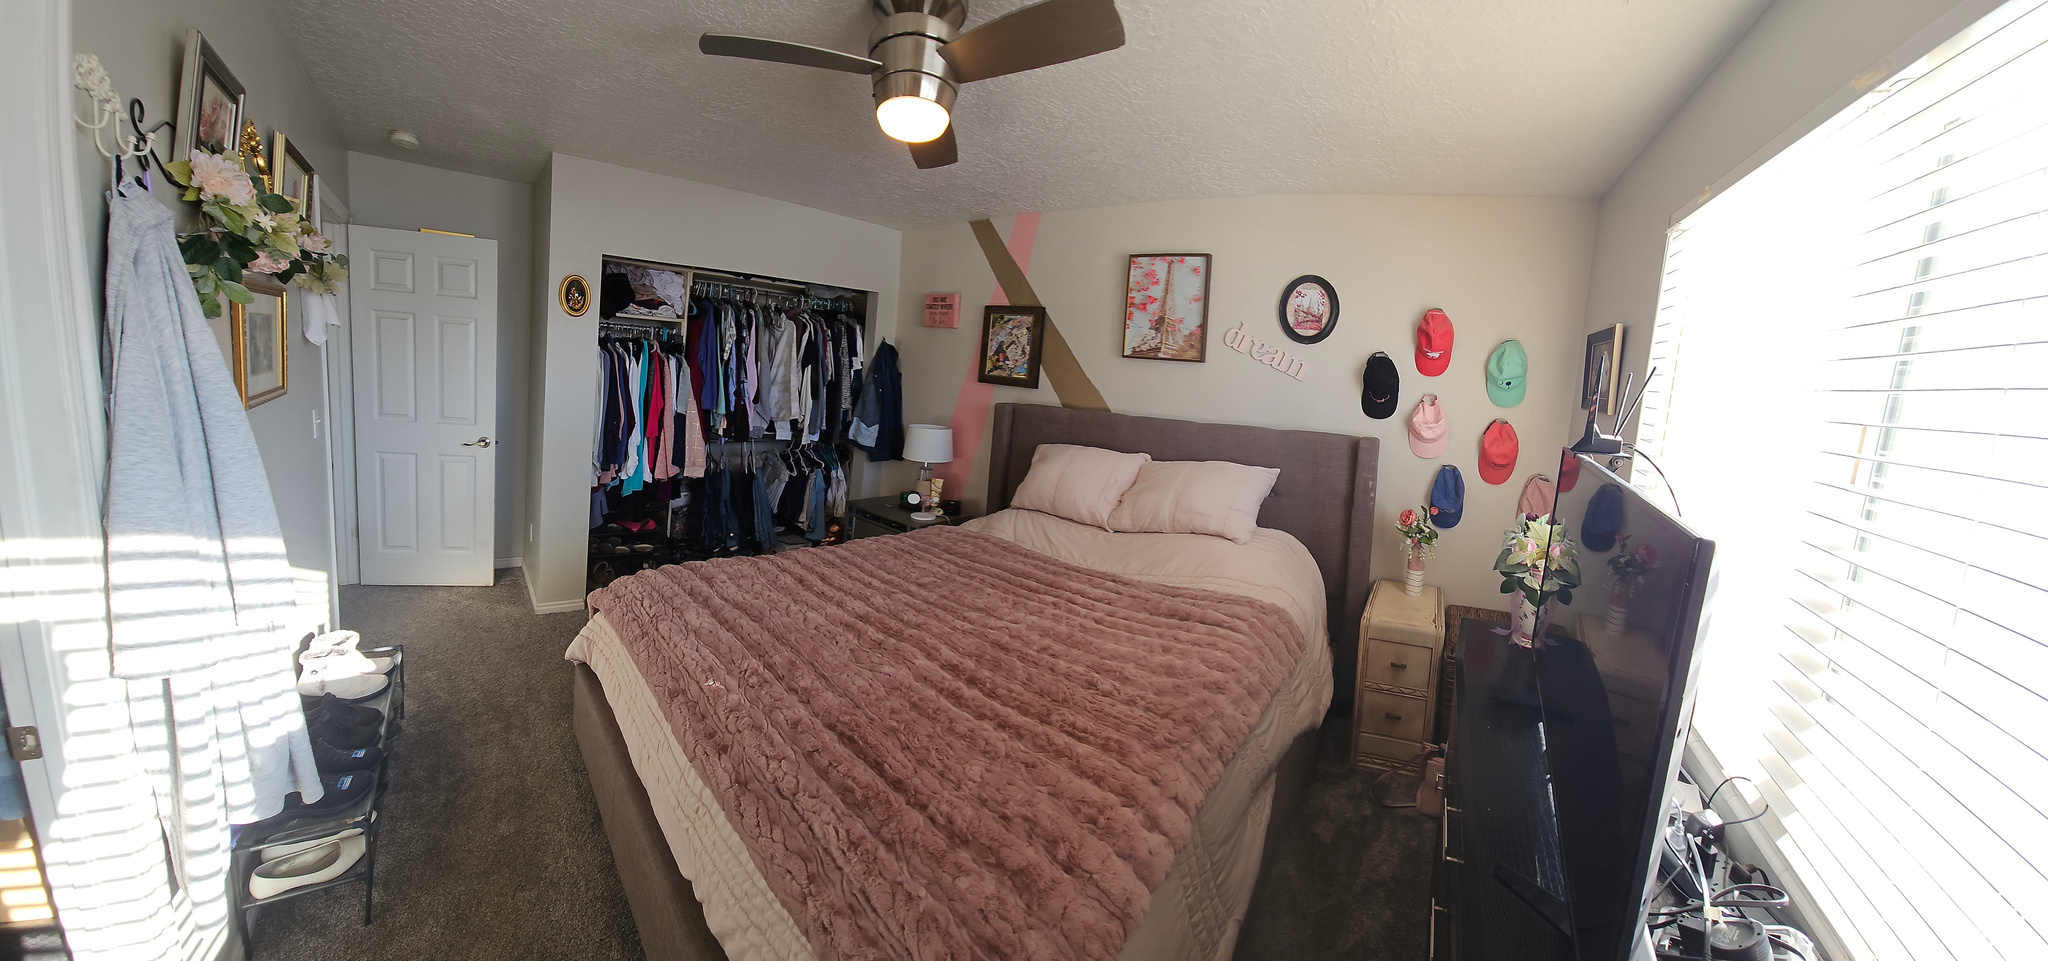 Bedroom with a closet, dark carpet, a textured ceiling, and ceiling fan